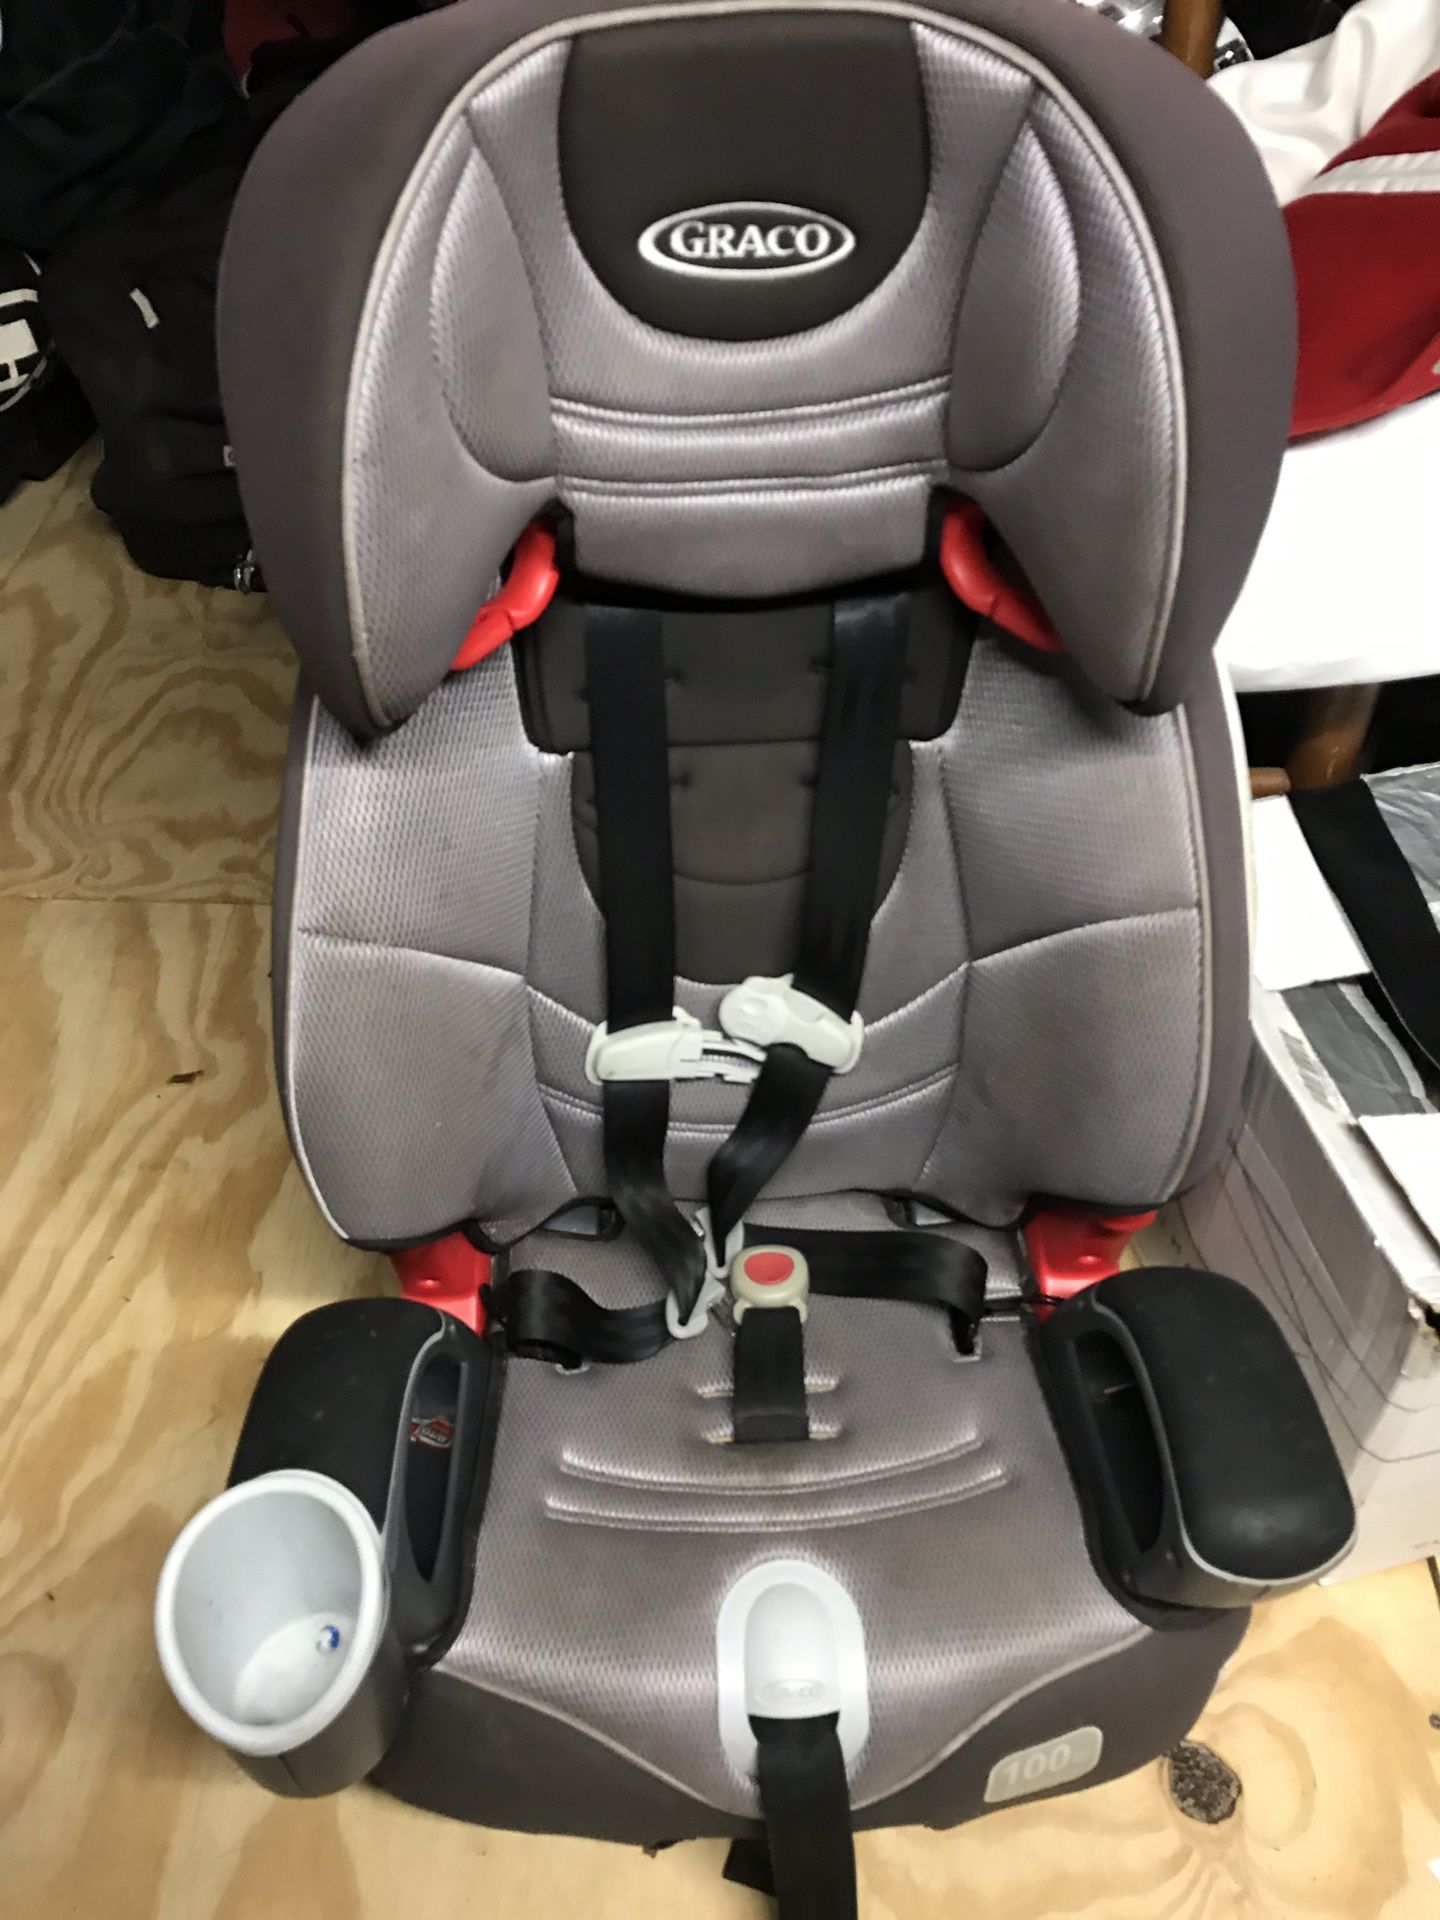 Graco car seat booster